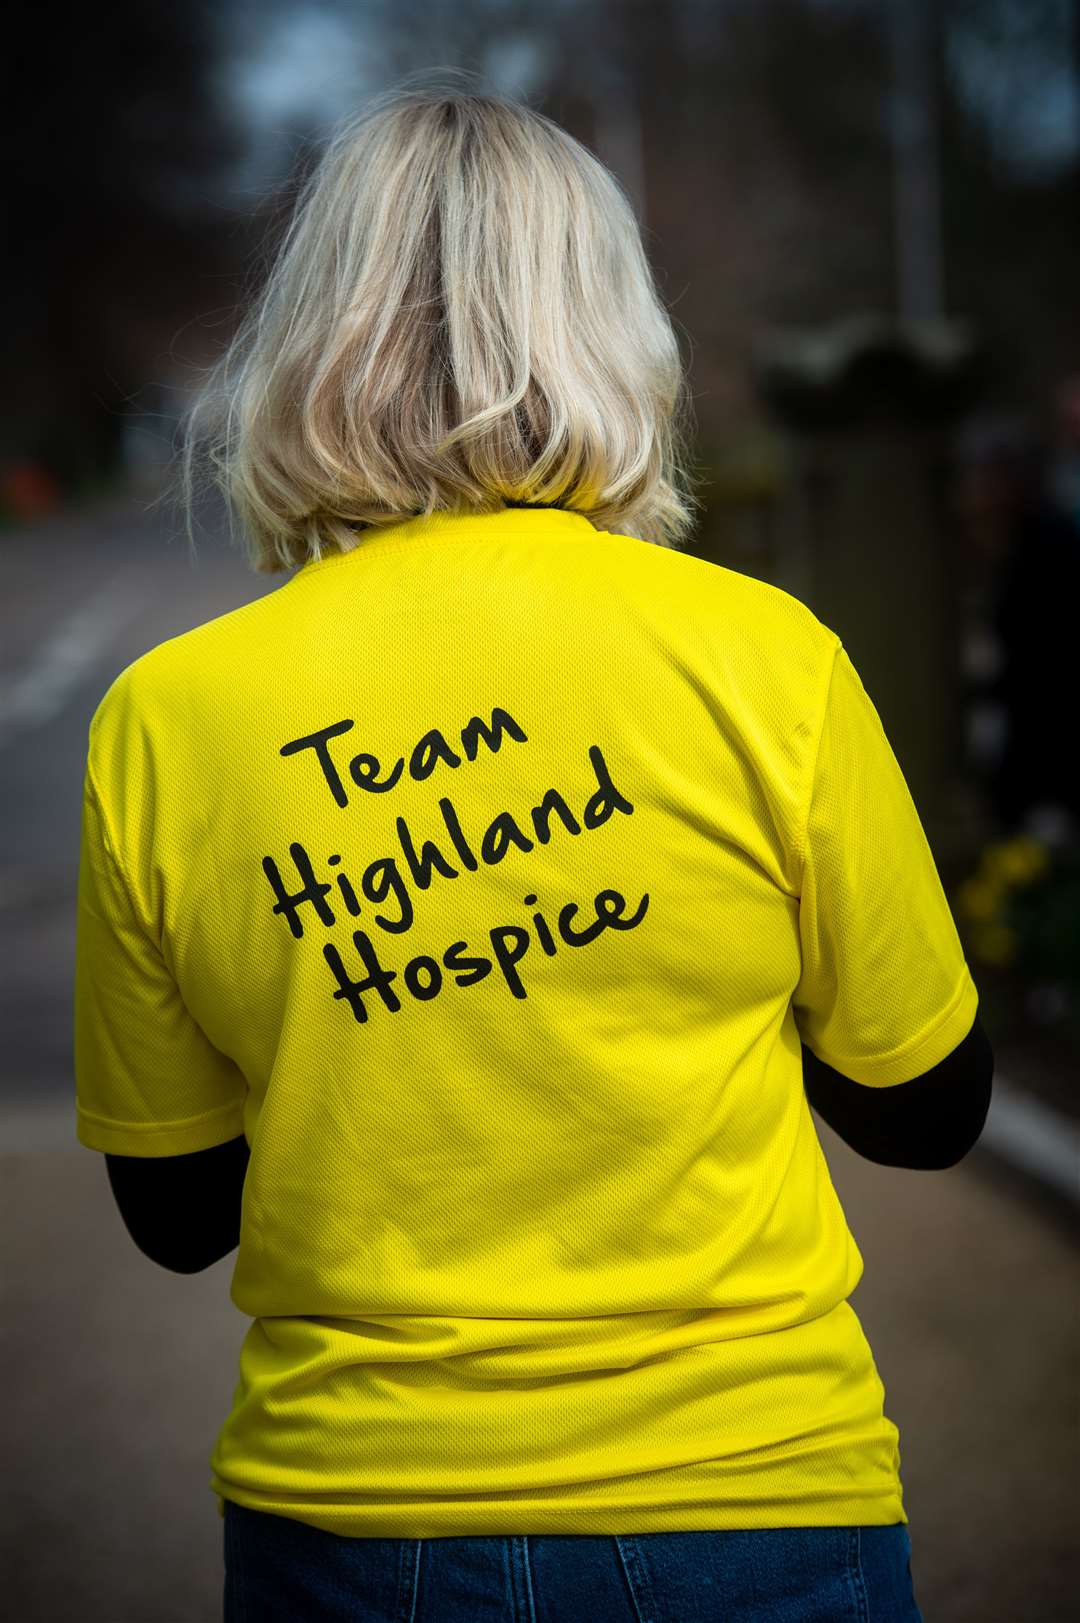 Participants at the Strictly Inverness fun run at Highland Hospice.